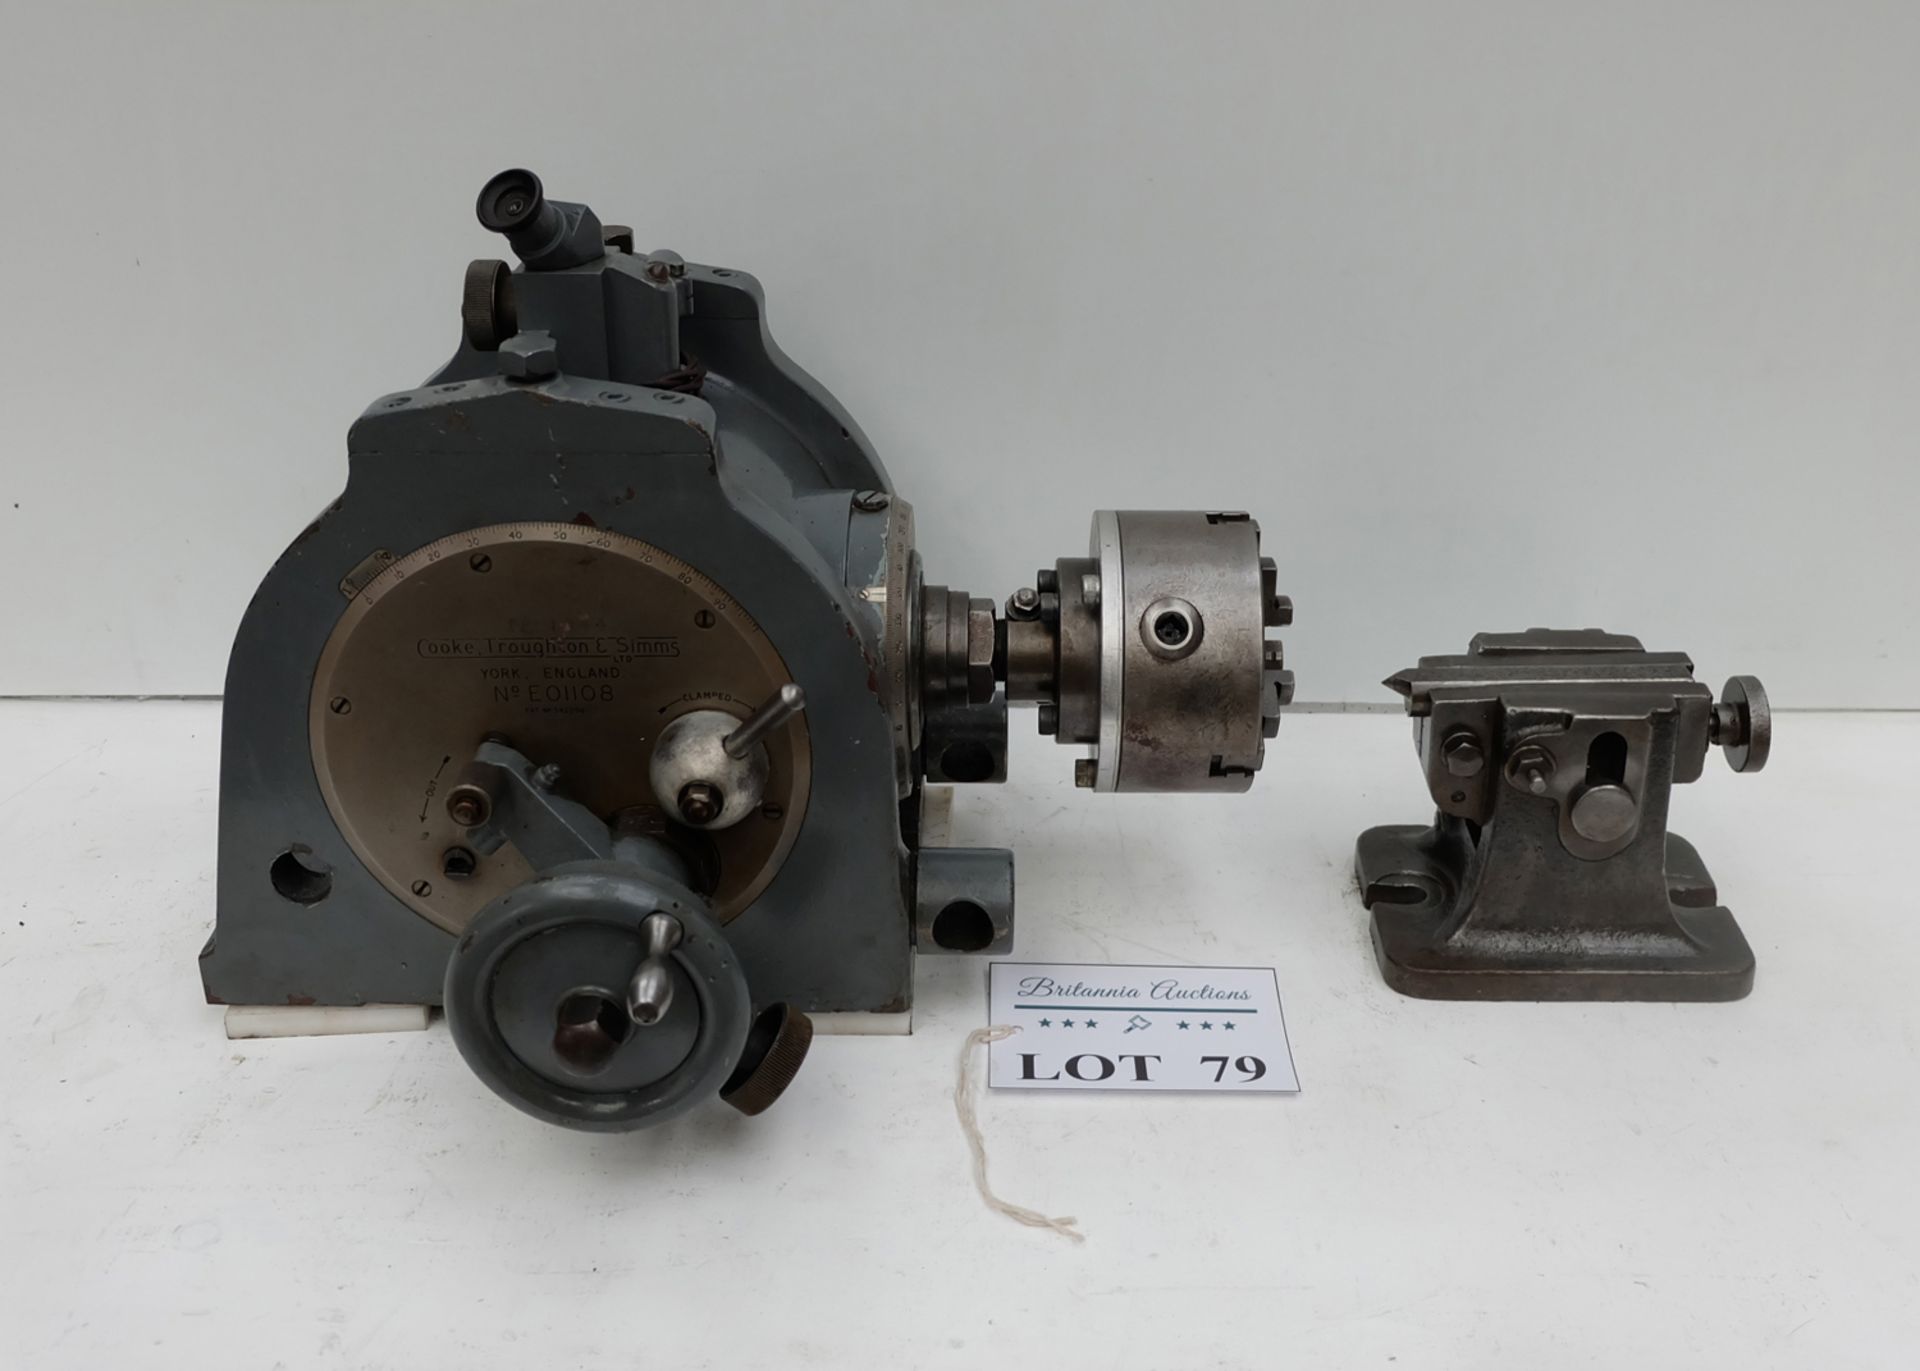 Cook Roughton. Smith 10" Tilting Optical Dividing Head. With 5" 3 Jaw Chuck and Tail Stock.